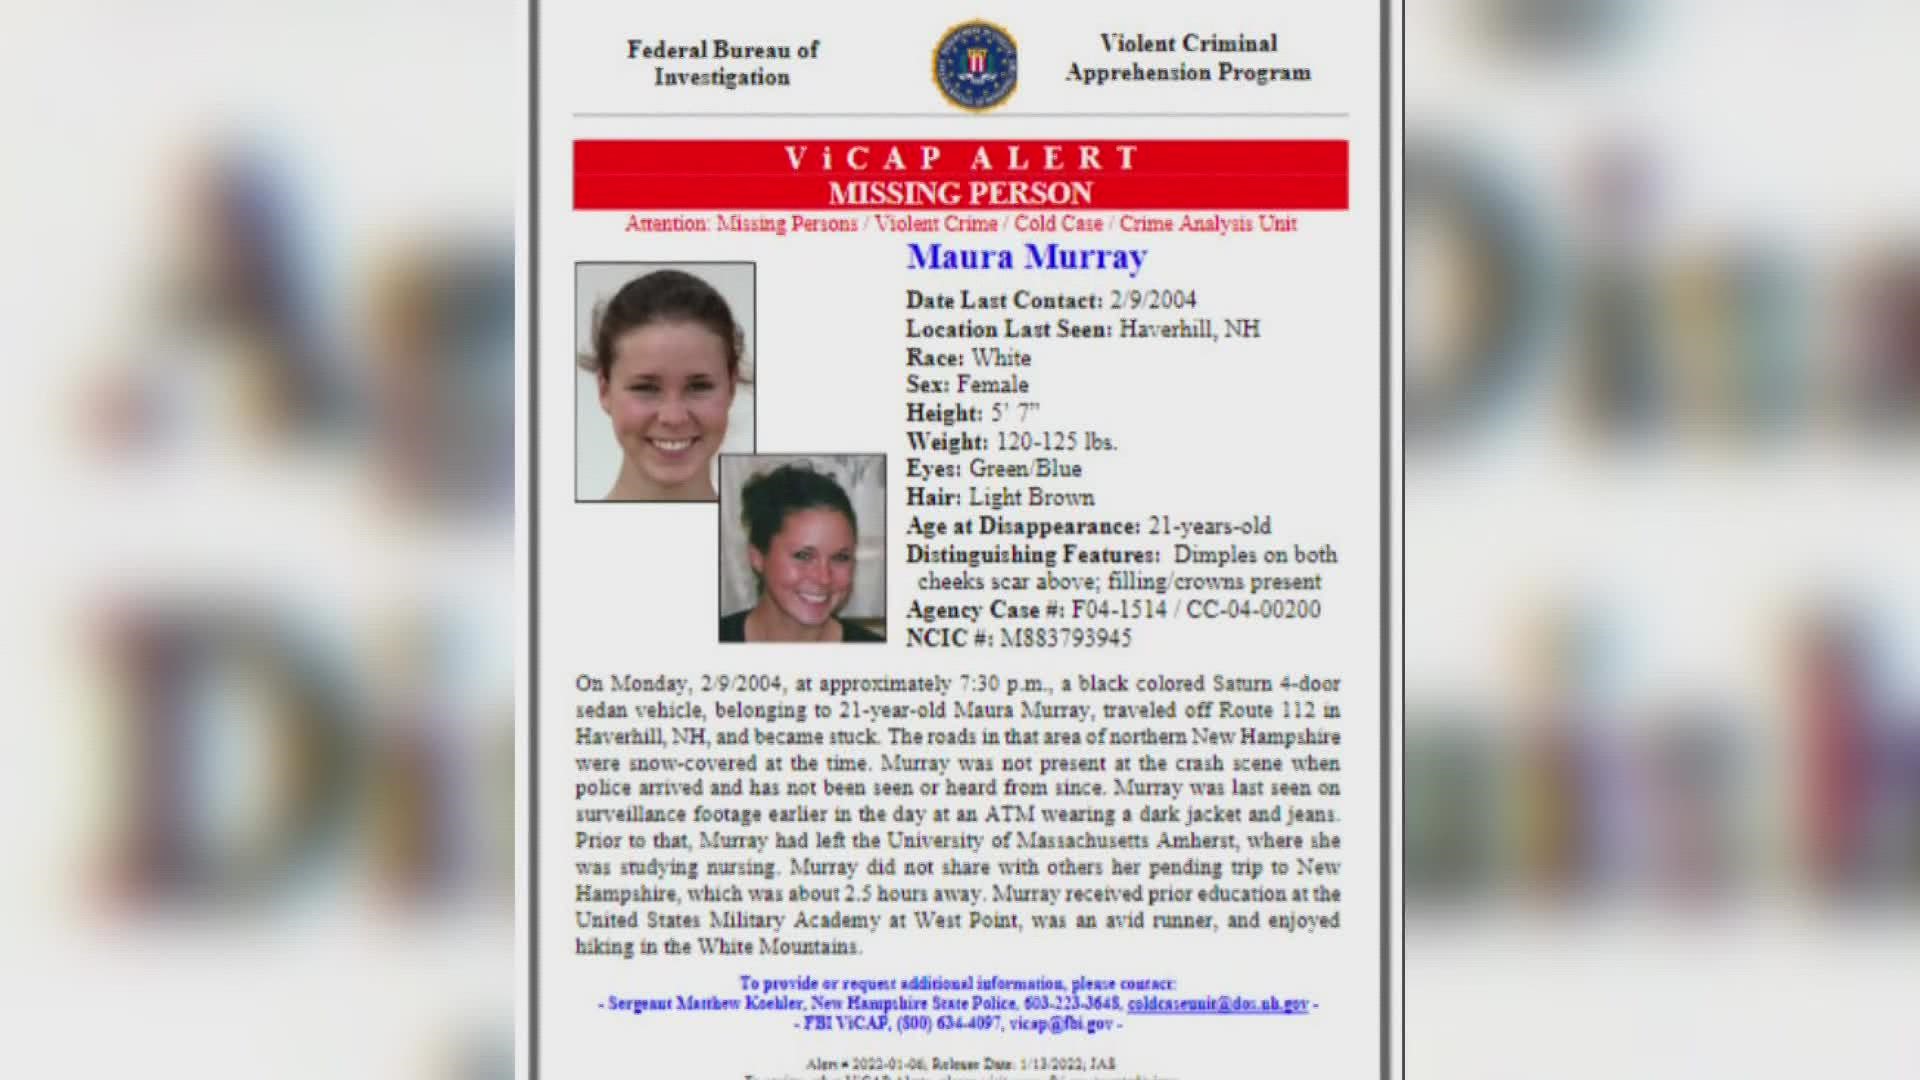 Maura Murray disappeared in 2004. The FBI has now issued a nationwide missing person alert on her case.